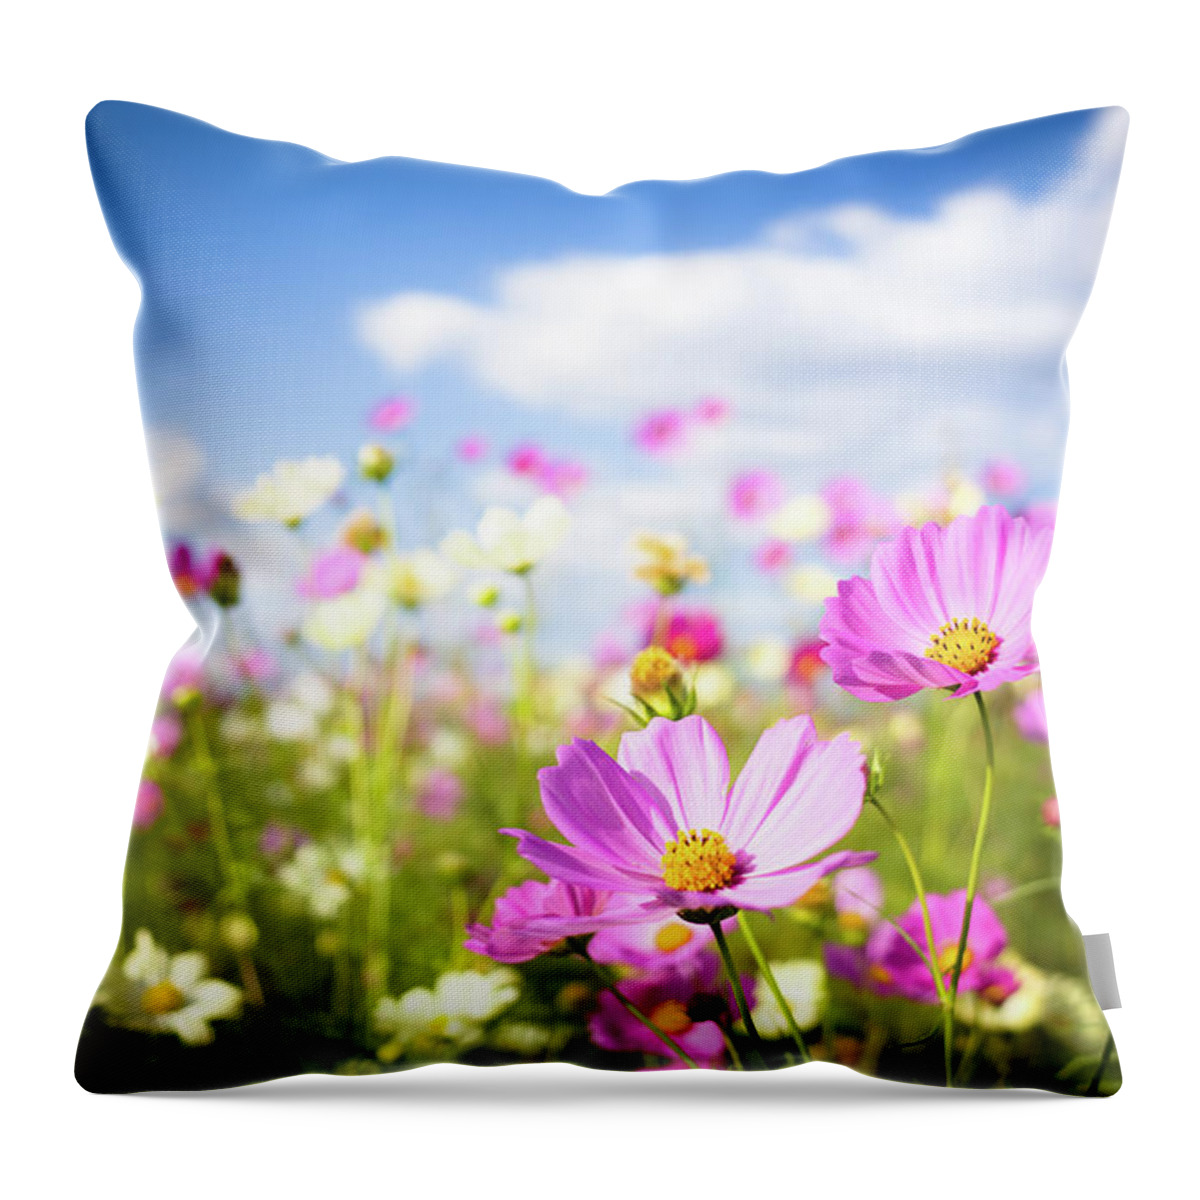 Wind Throw Pillow featuring the photograph Cosmos Flowers In Full Bloom by Marser